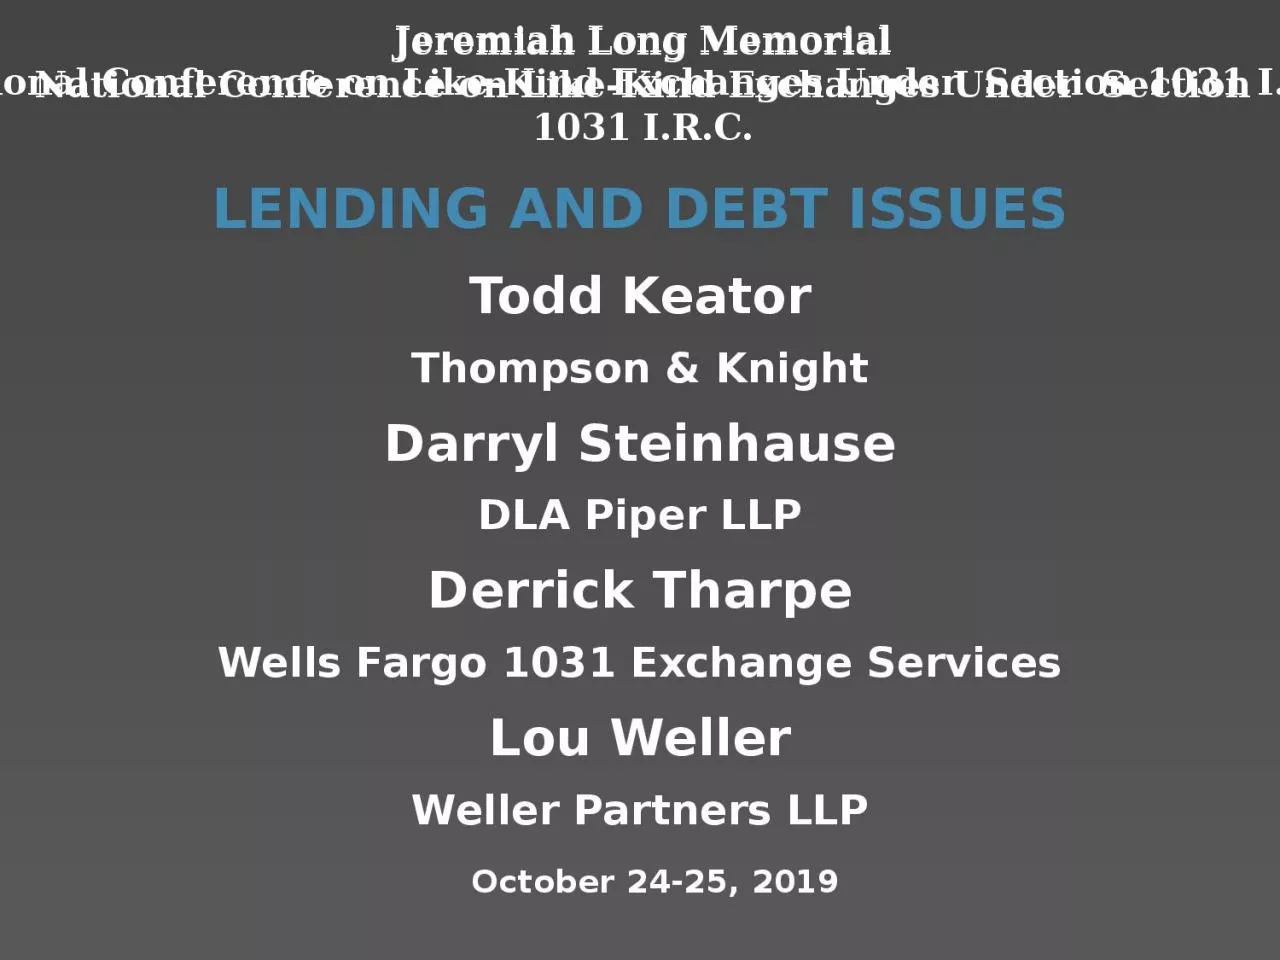 LENDING AND DEBT ISSUES Todd Keator